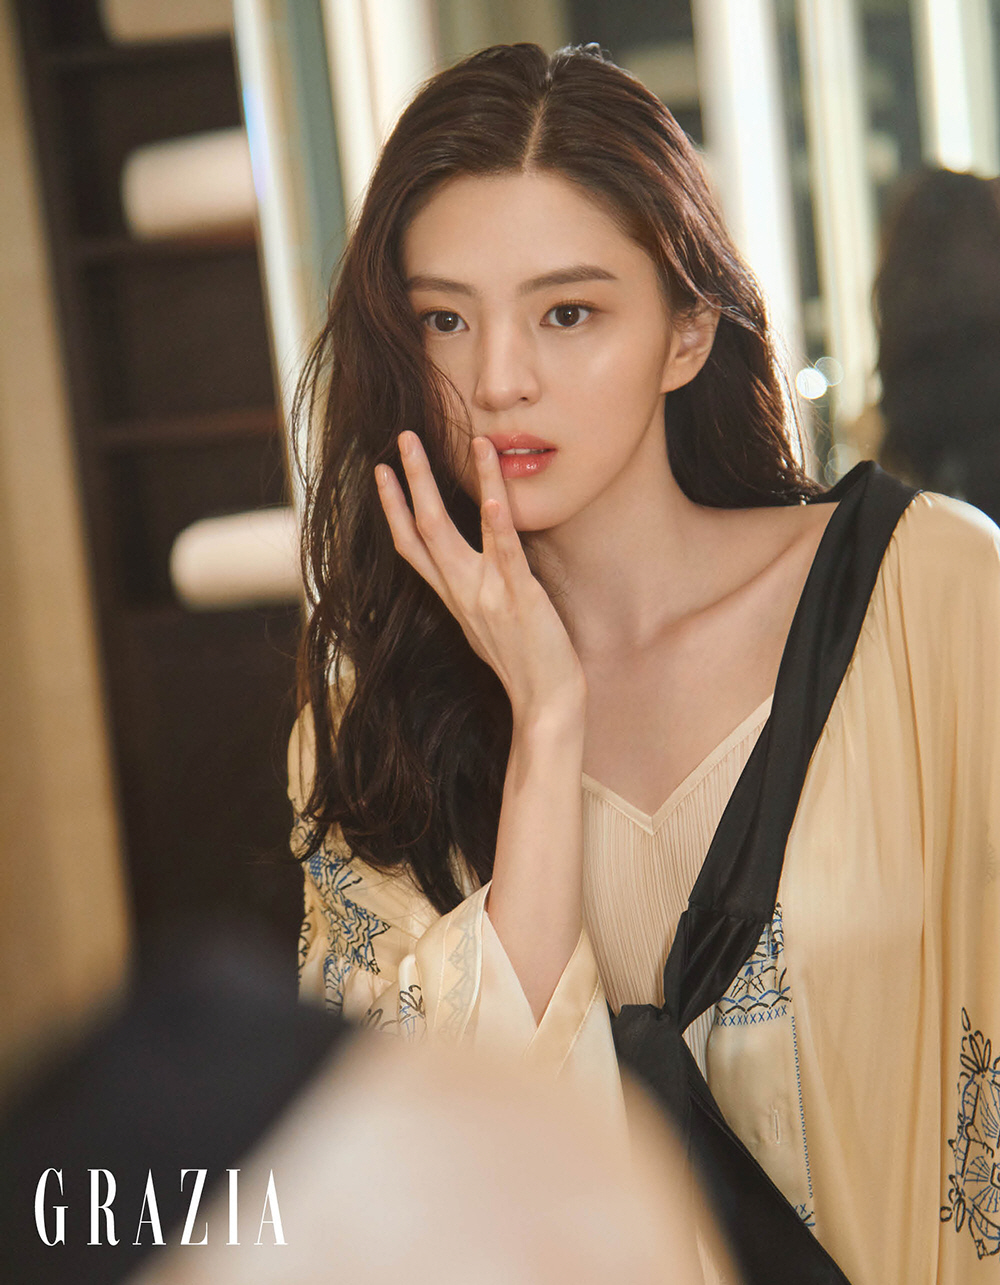 han-so-hee-captures-fans-hearts-with-photoshoot-by-grazia-magazine-2.